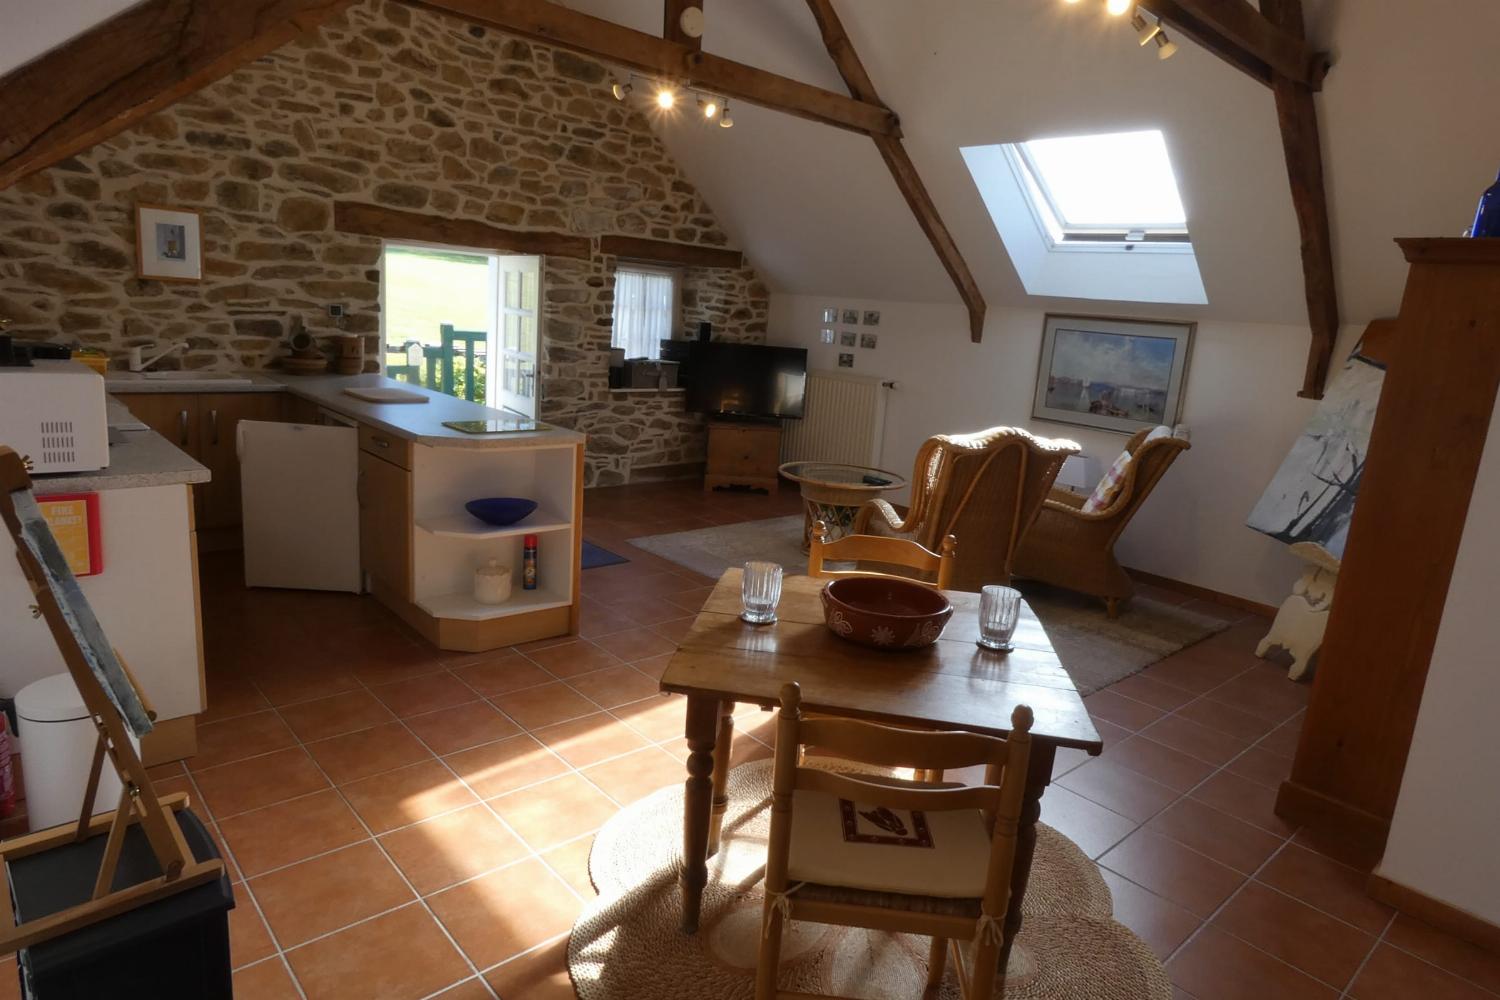 Sitting room | Rental cottage in Brittany